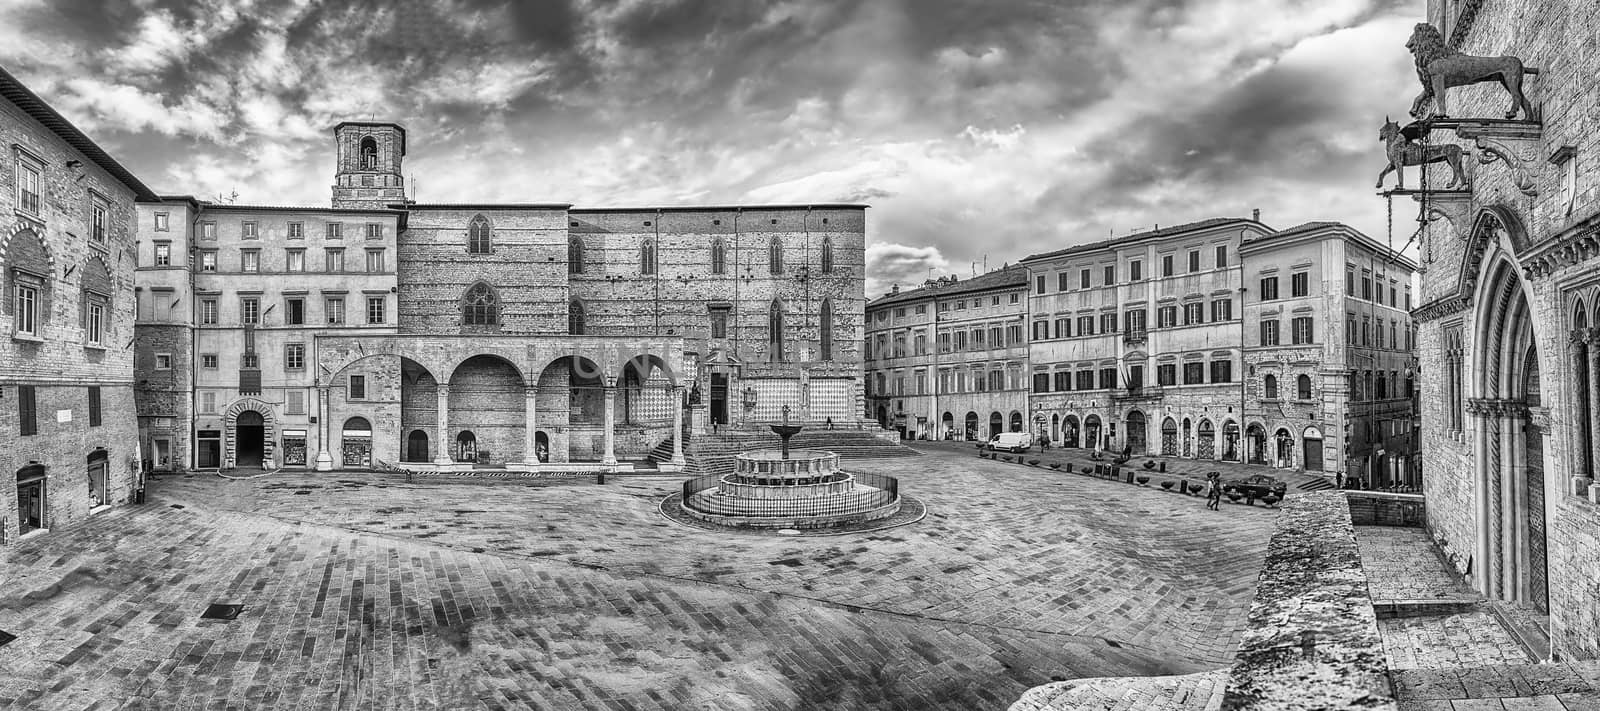 Panoramic view of Piazza IV Novembre, main square and masterpiece of medieval architecture in Perugia, Italy